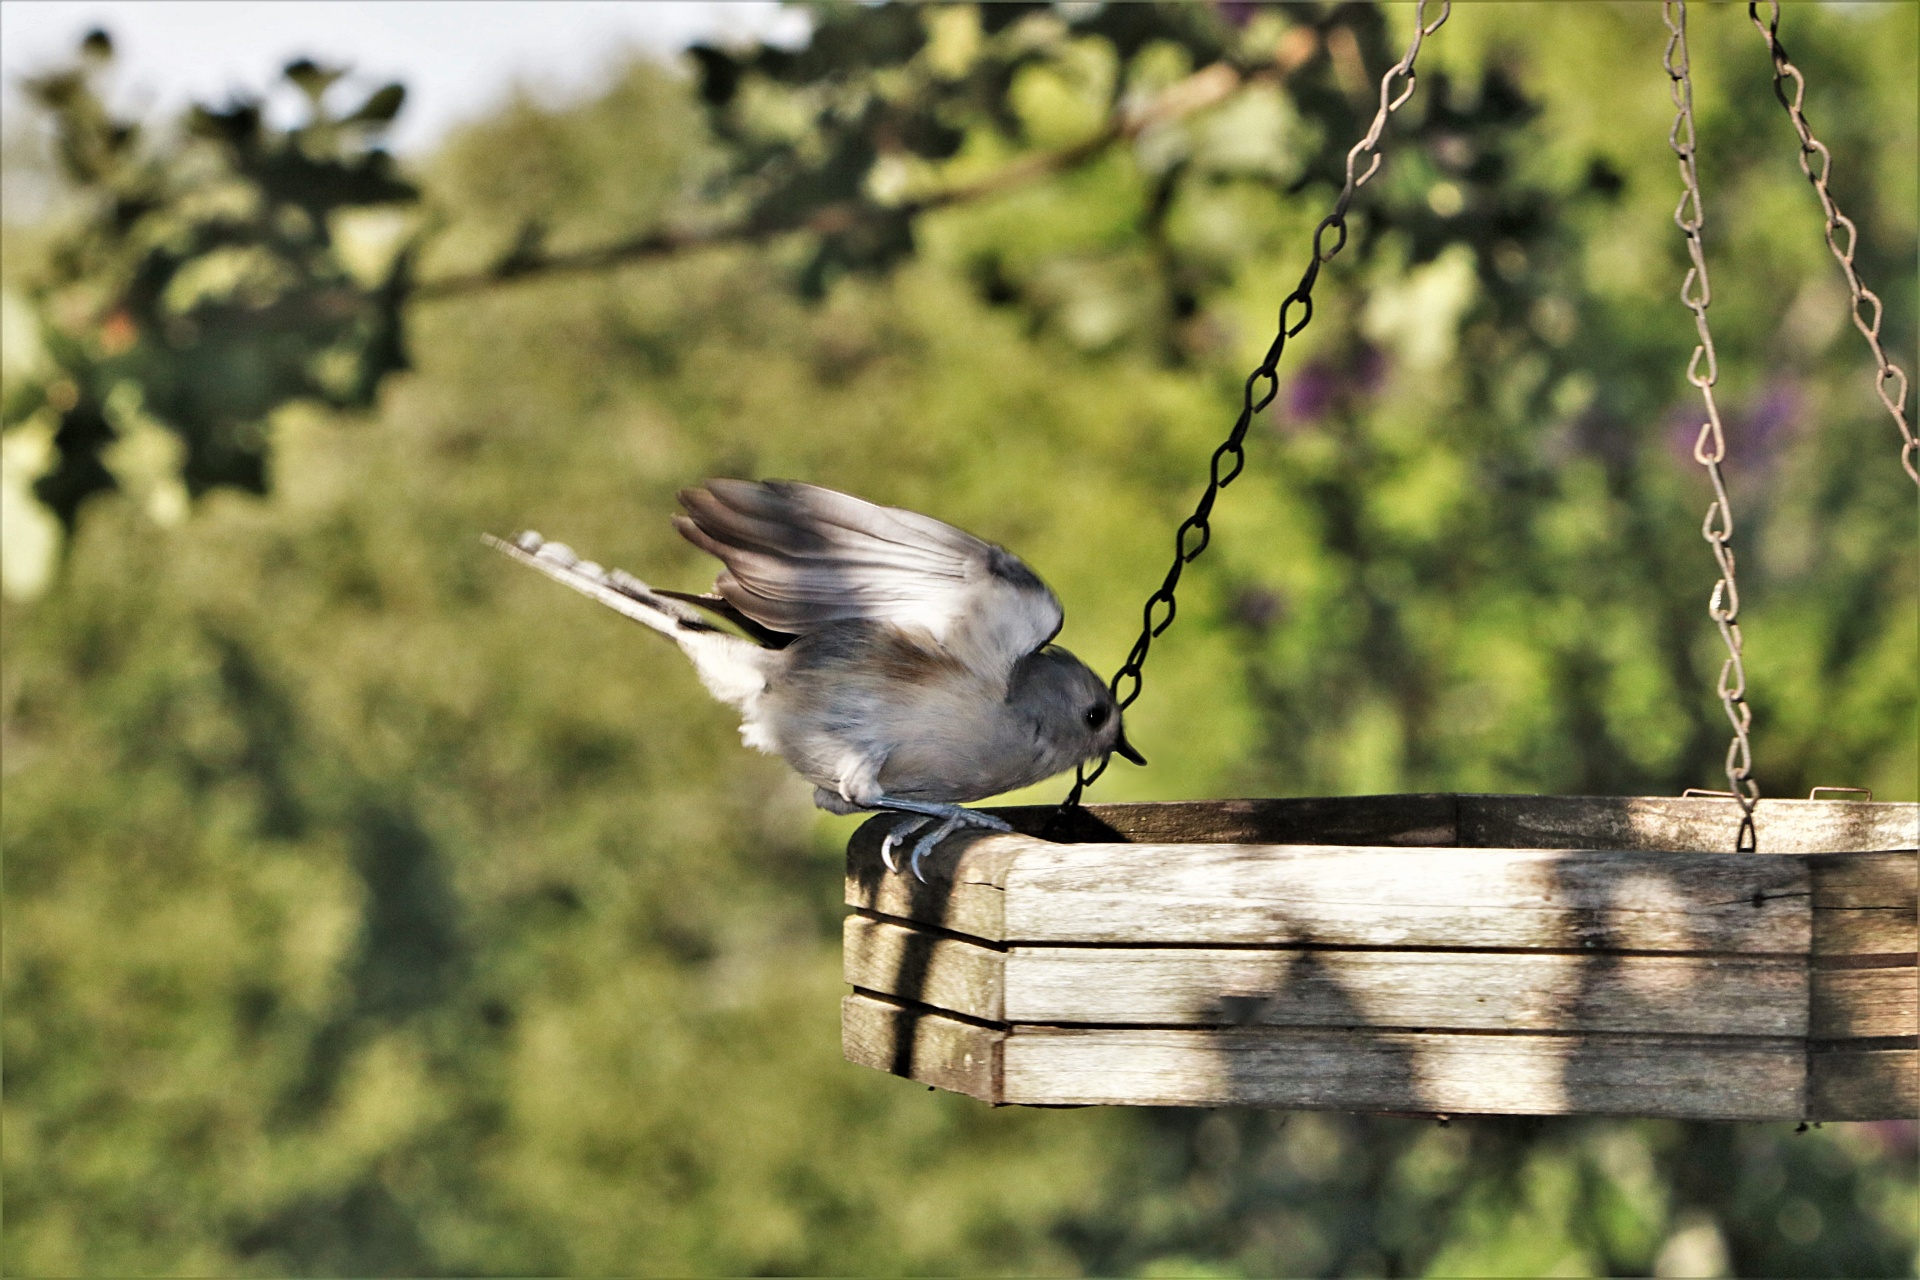 A tufted titmouse bird, with wings up, landing on a wood bird feeder.